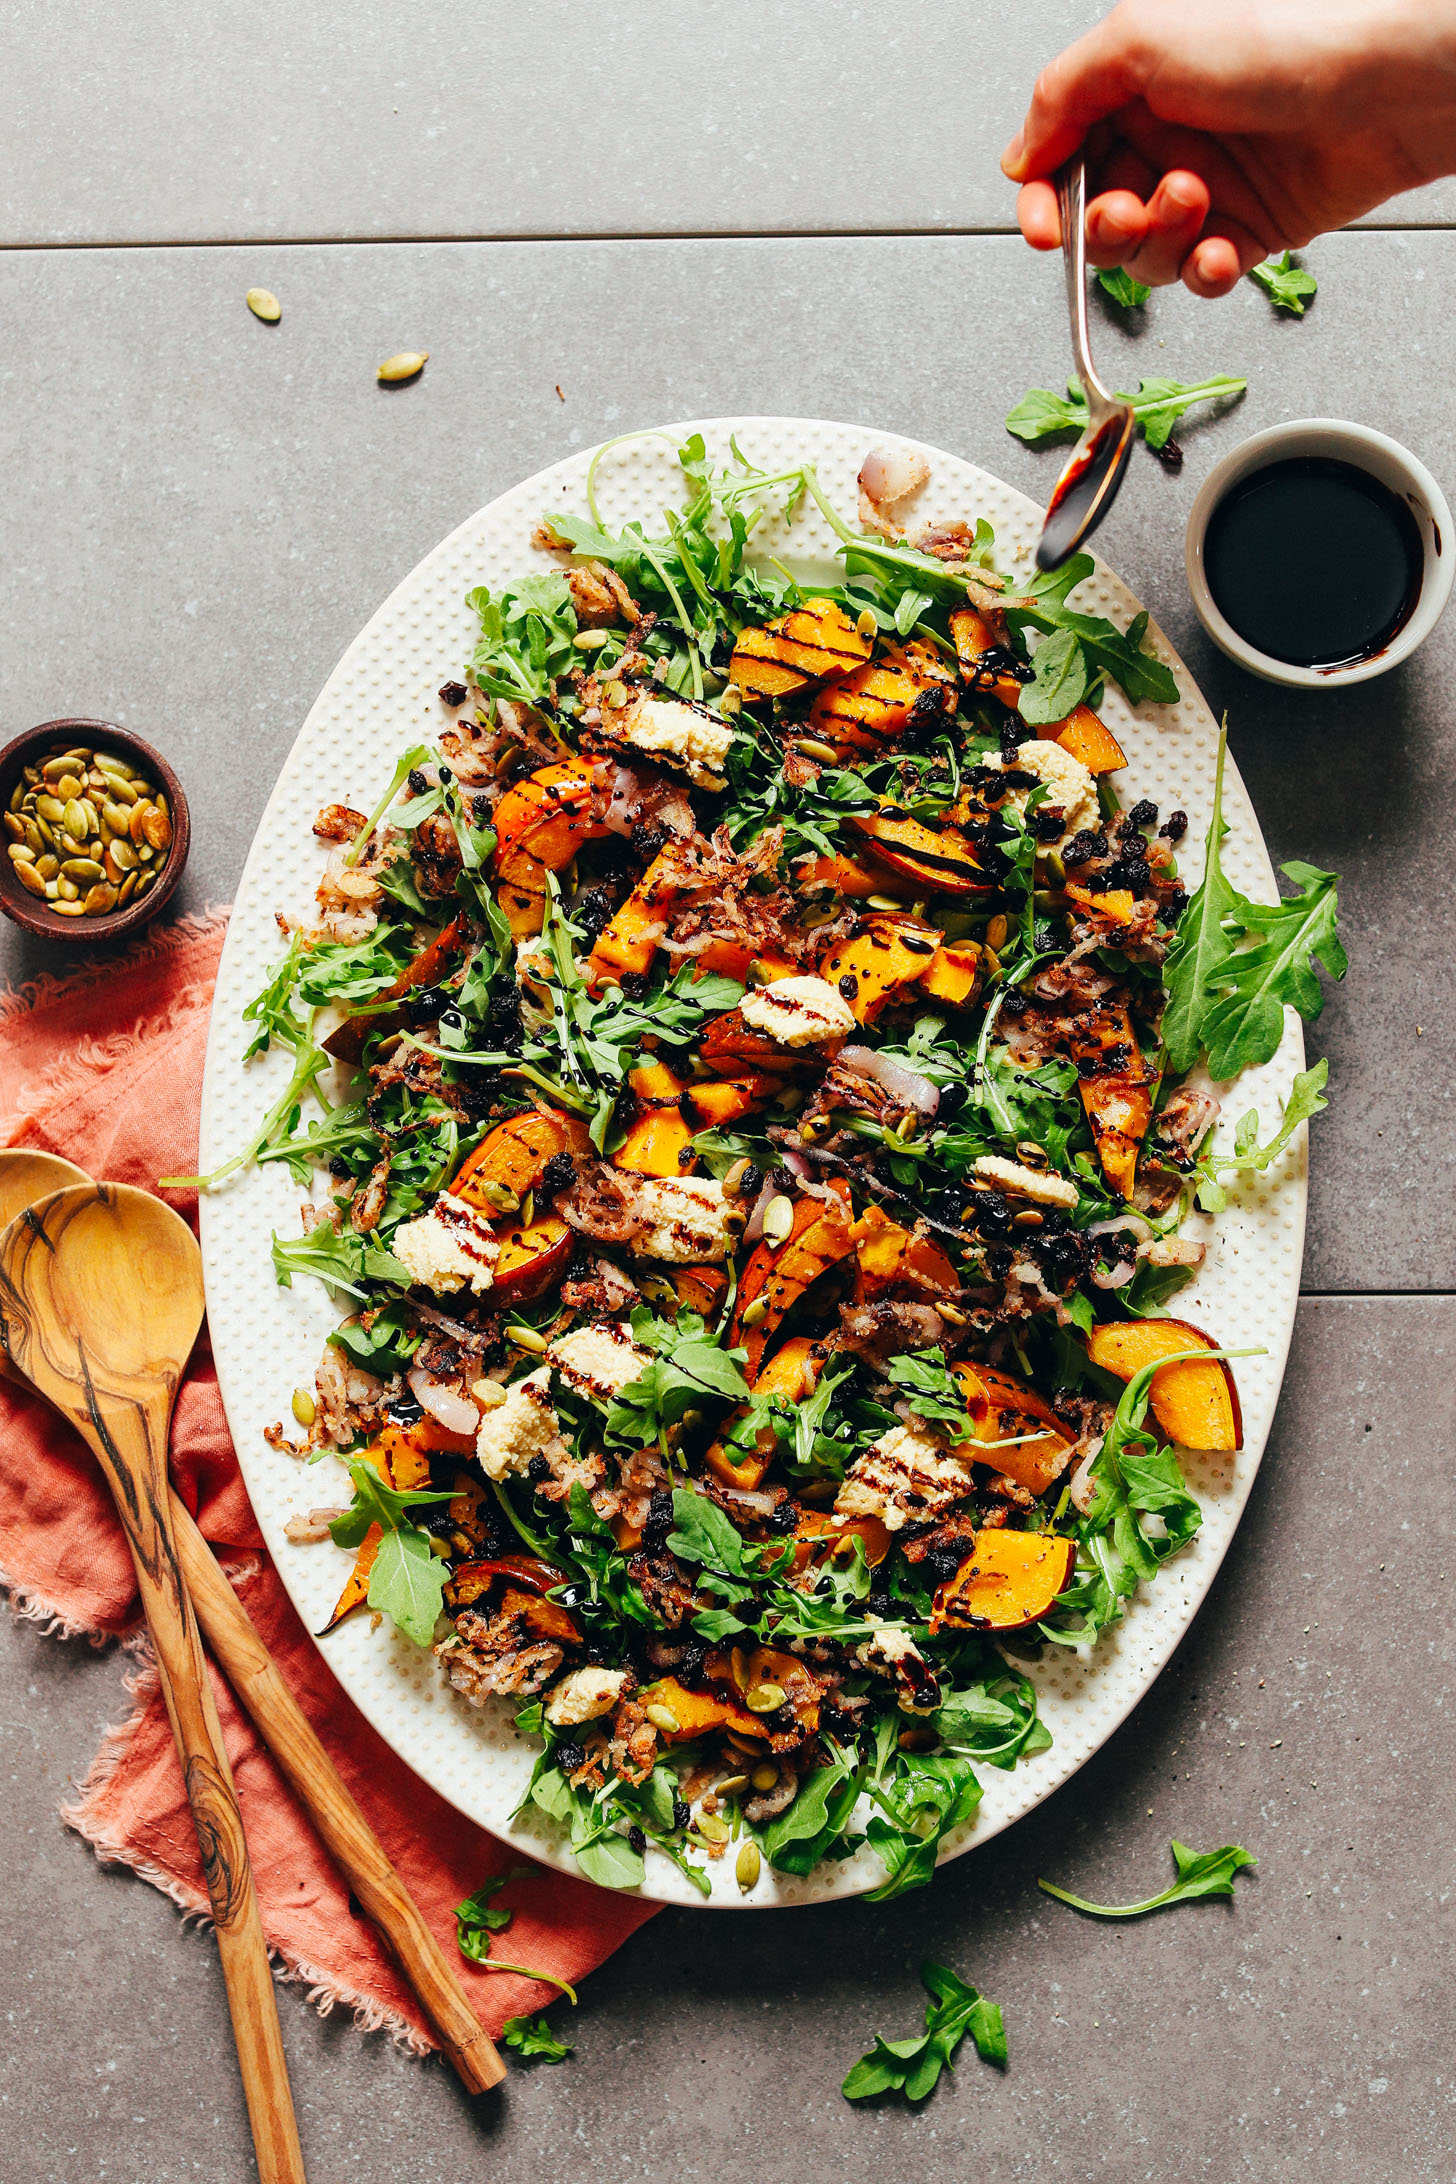 Large platter filled with delicious plant-based Roasted Squash Salad with Nut Cheese and Balsamic